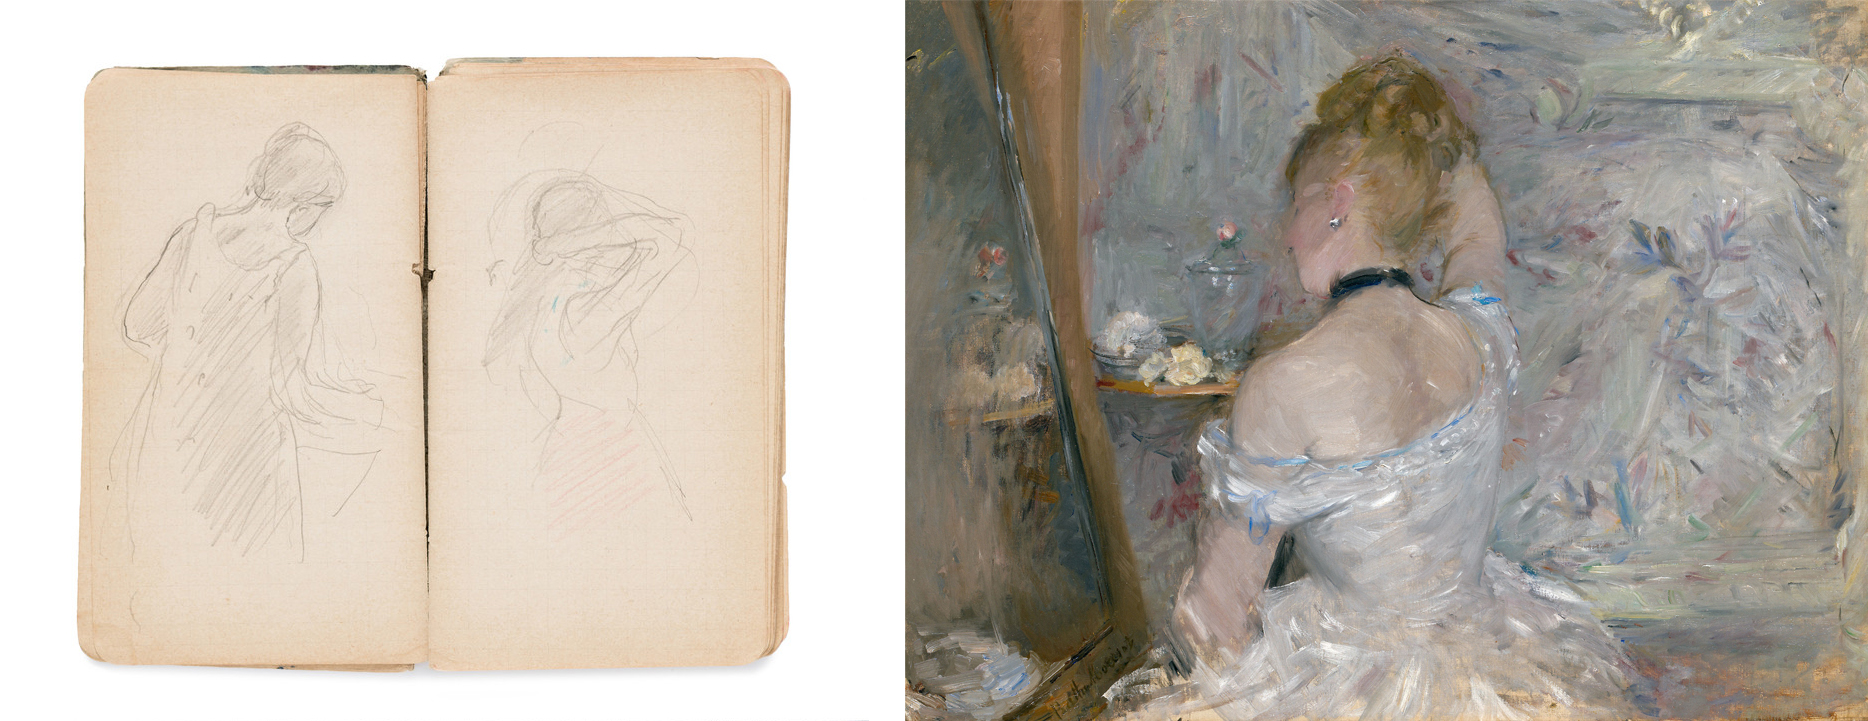 Left: Berthe Morisot, Sketchbook, c. 1891–93, Los Angeles County Museum of Art, gift of Ray and Frances Stark, photo © Museum Associates/LACMA; Right: Berthe Morisot, Woman at Her Toilette, 1870–80, Art Institute of Chicago, Stickney Fund, photo © Art Institute of Chicago